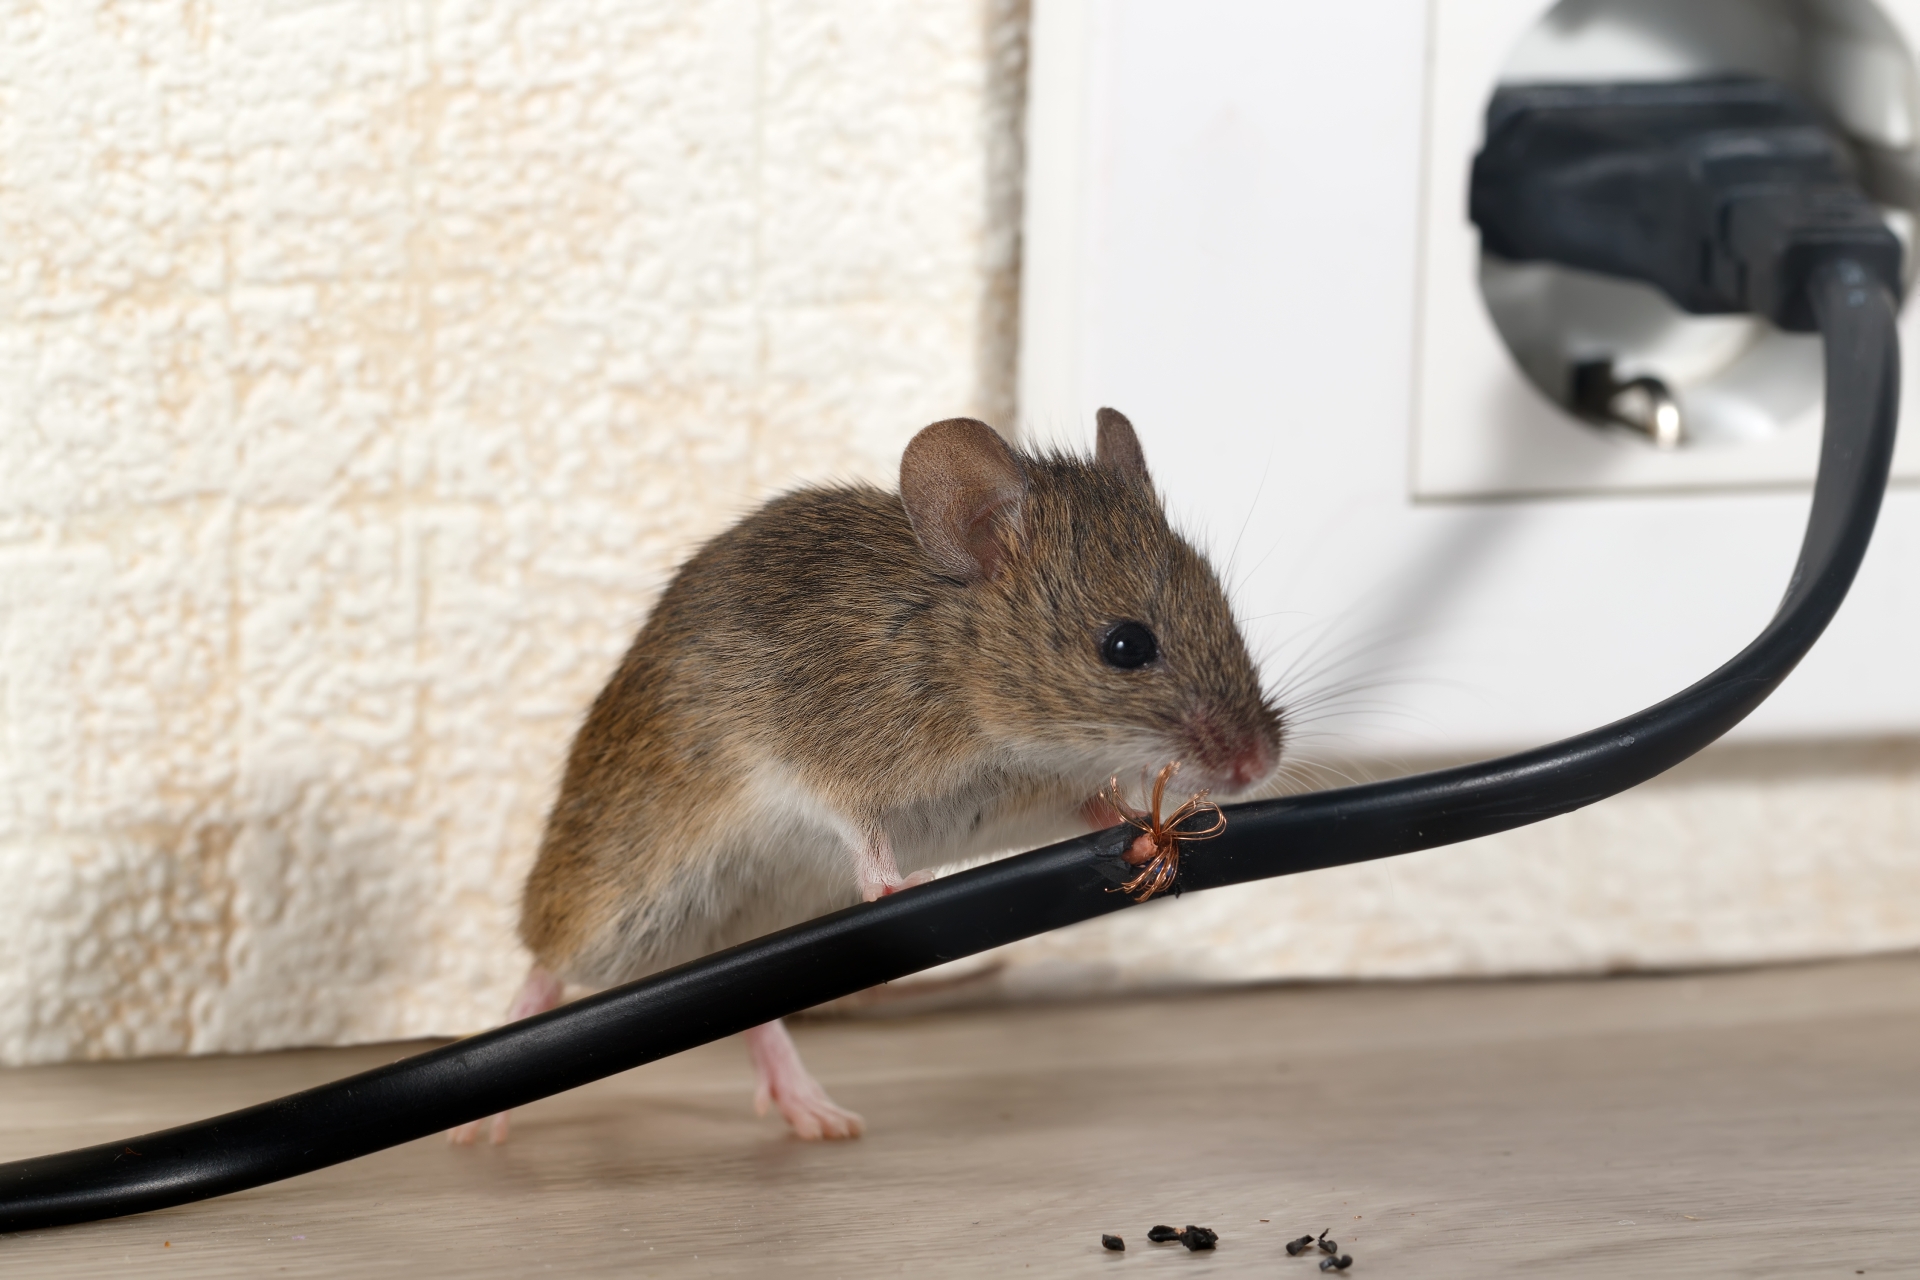 Mice Infestation, Pest Control in Clayhall, IG5. Call Now 020 8166 9746